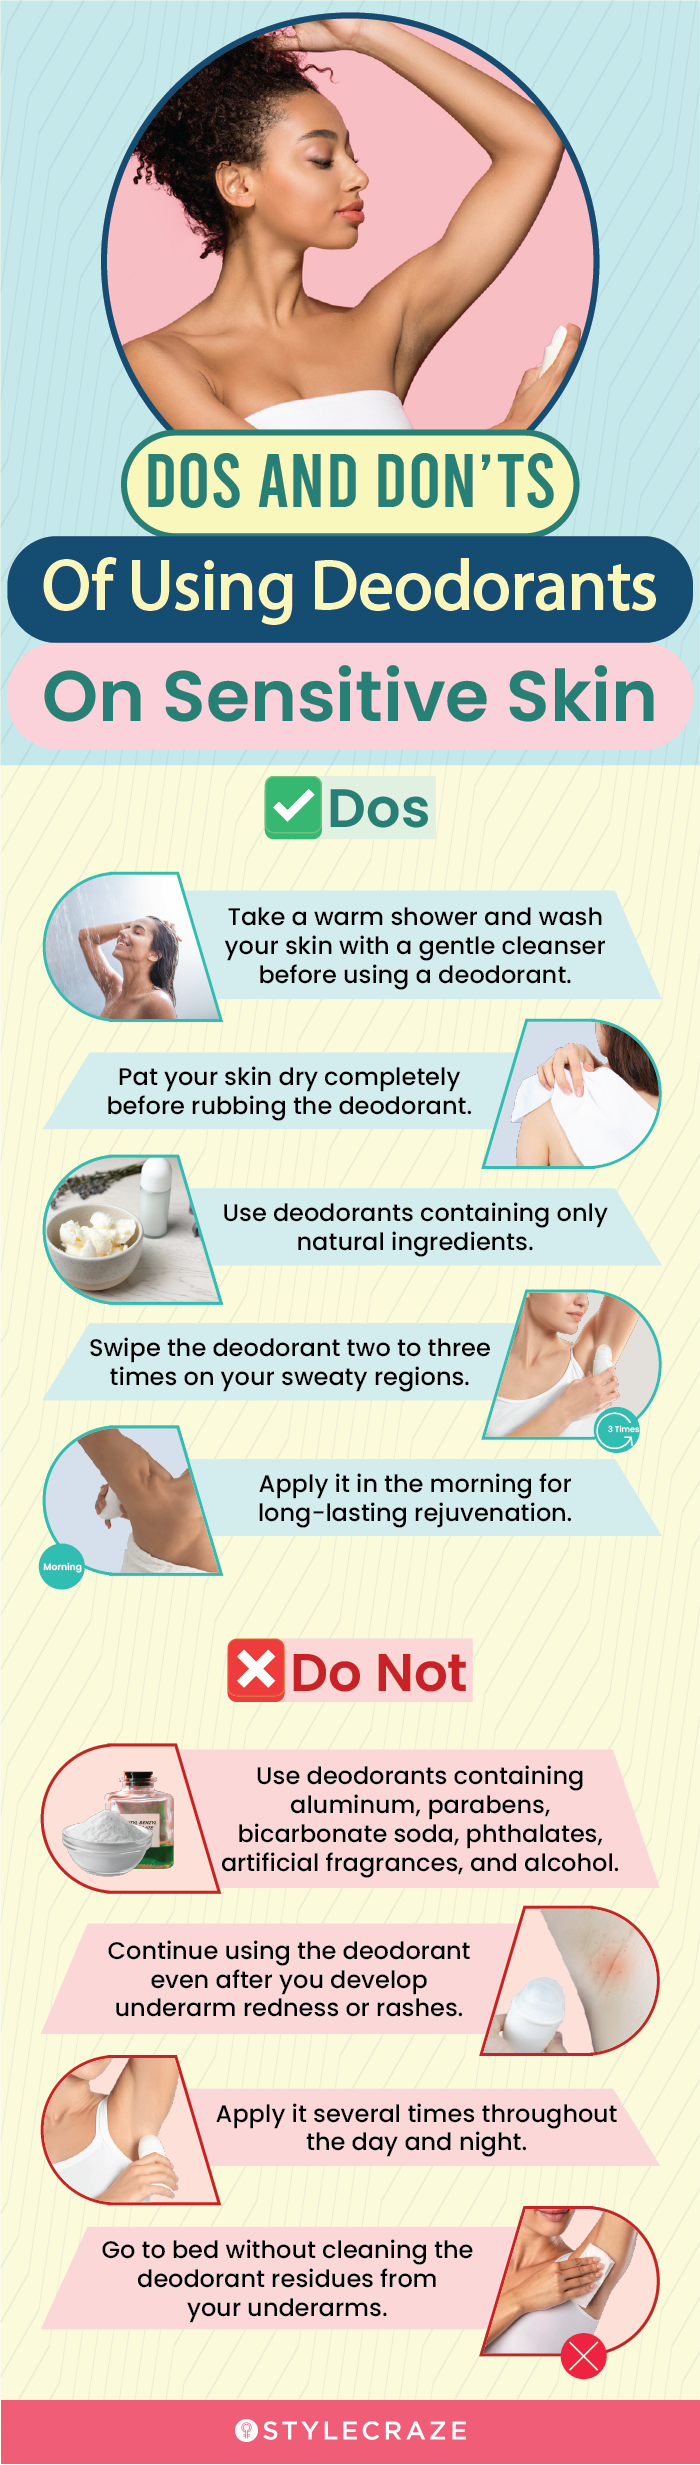 DOs And DON’Ts Of Using Deodorants On Sensitive Skin (infographic)